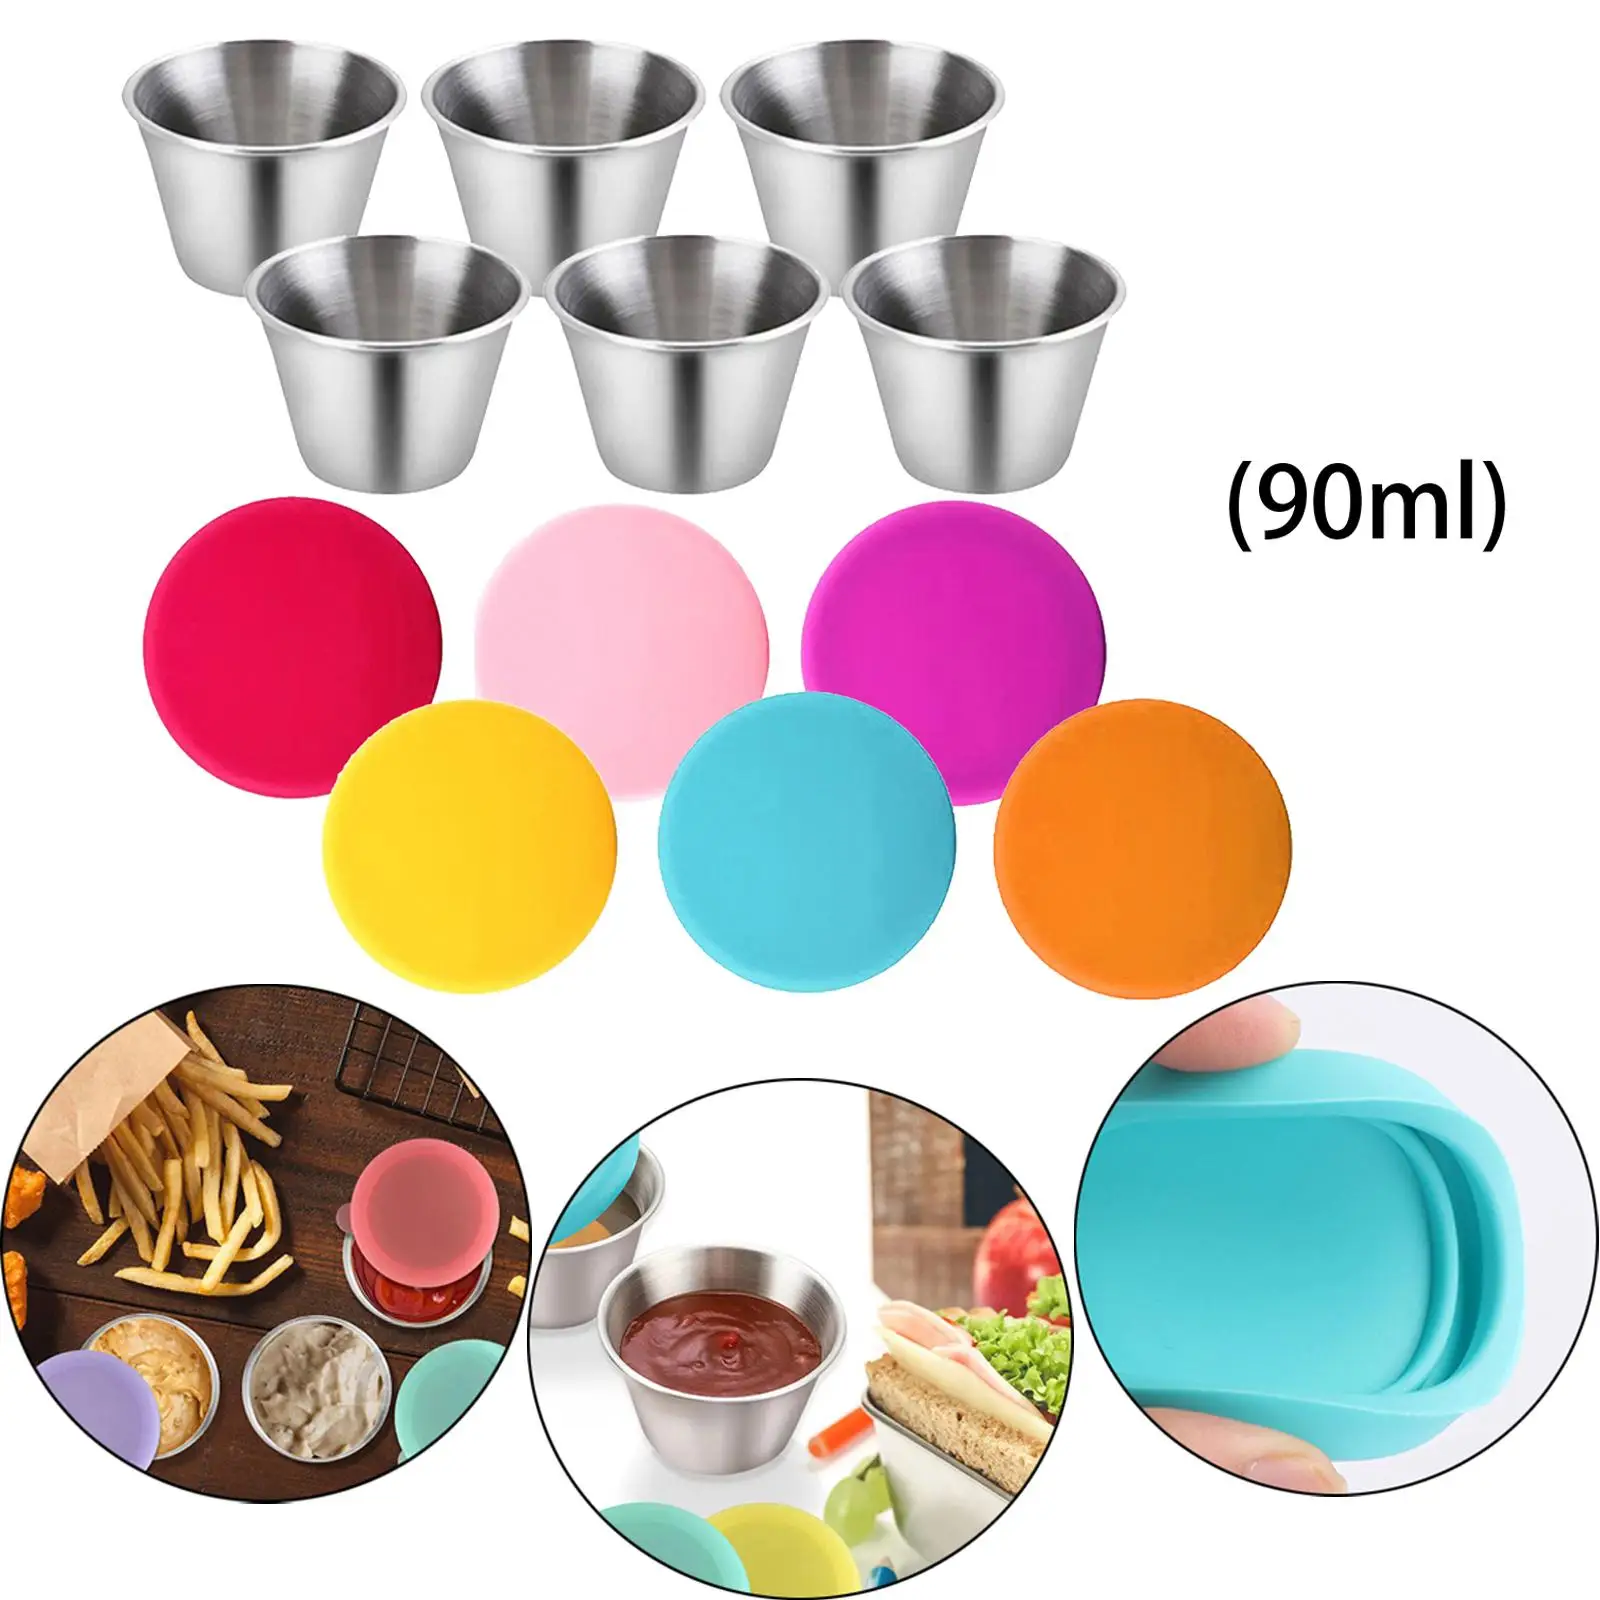 Multifunctional Sauce Cups Stainless Steel Sauce Pan Condiment Containers for Tea Sauces Butter Fries Dipping Sauce Dish Coffee